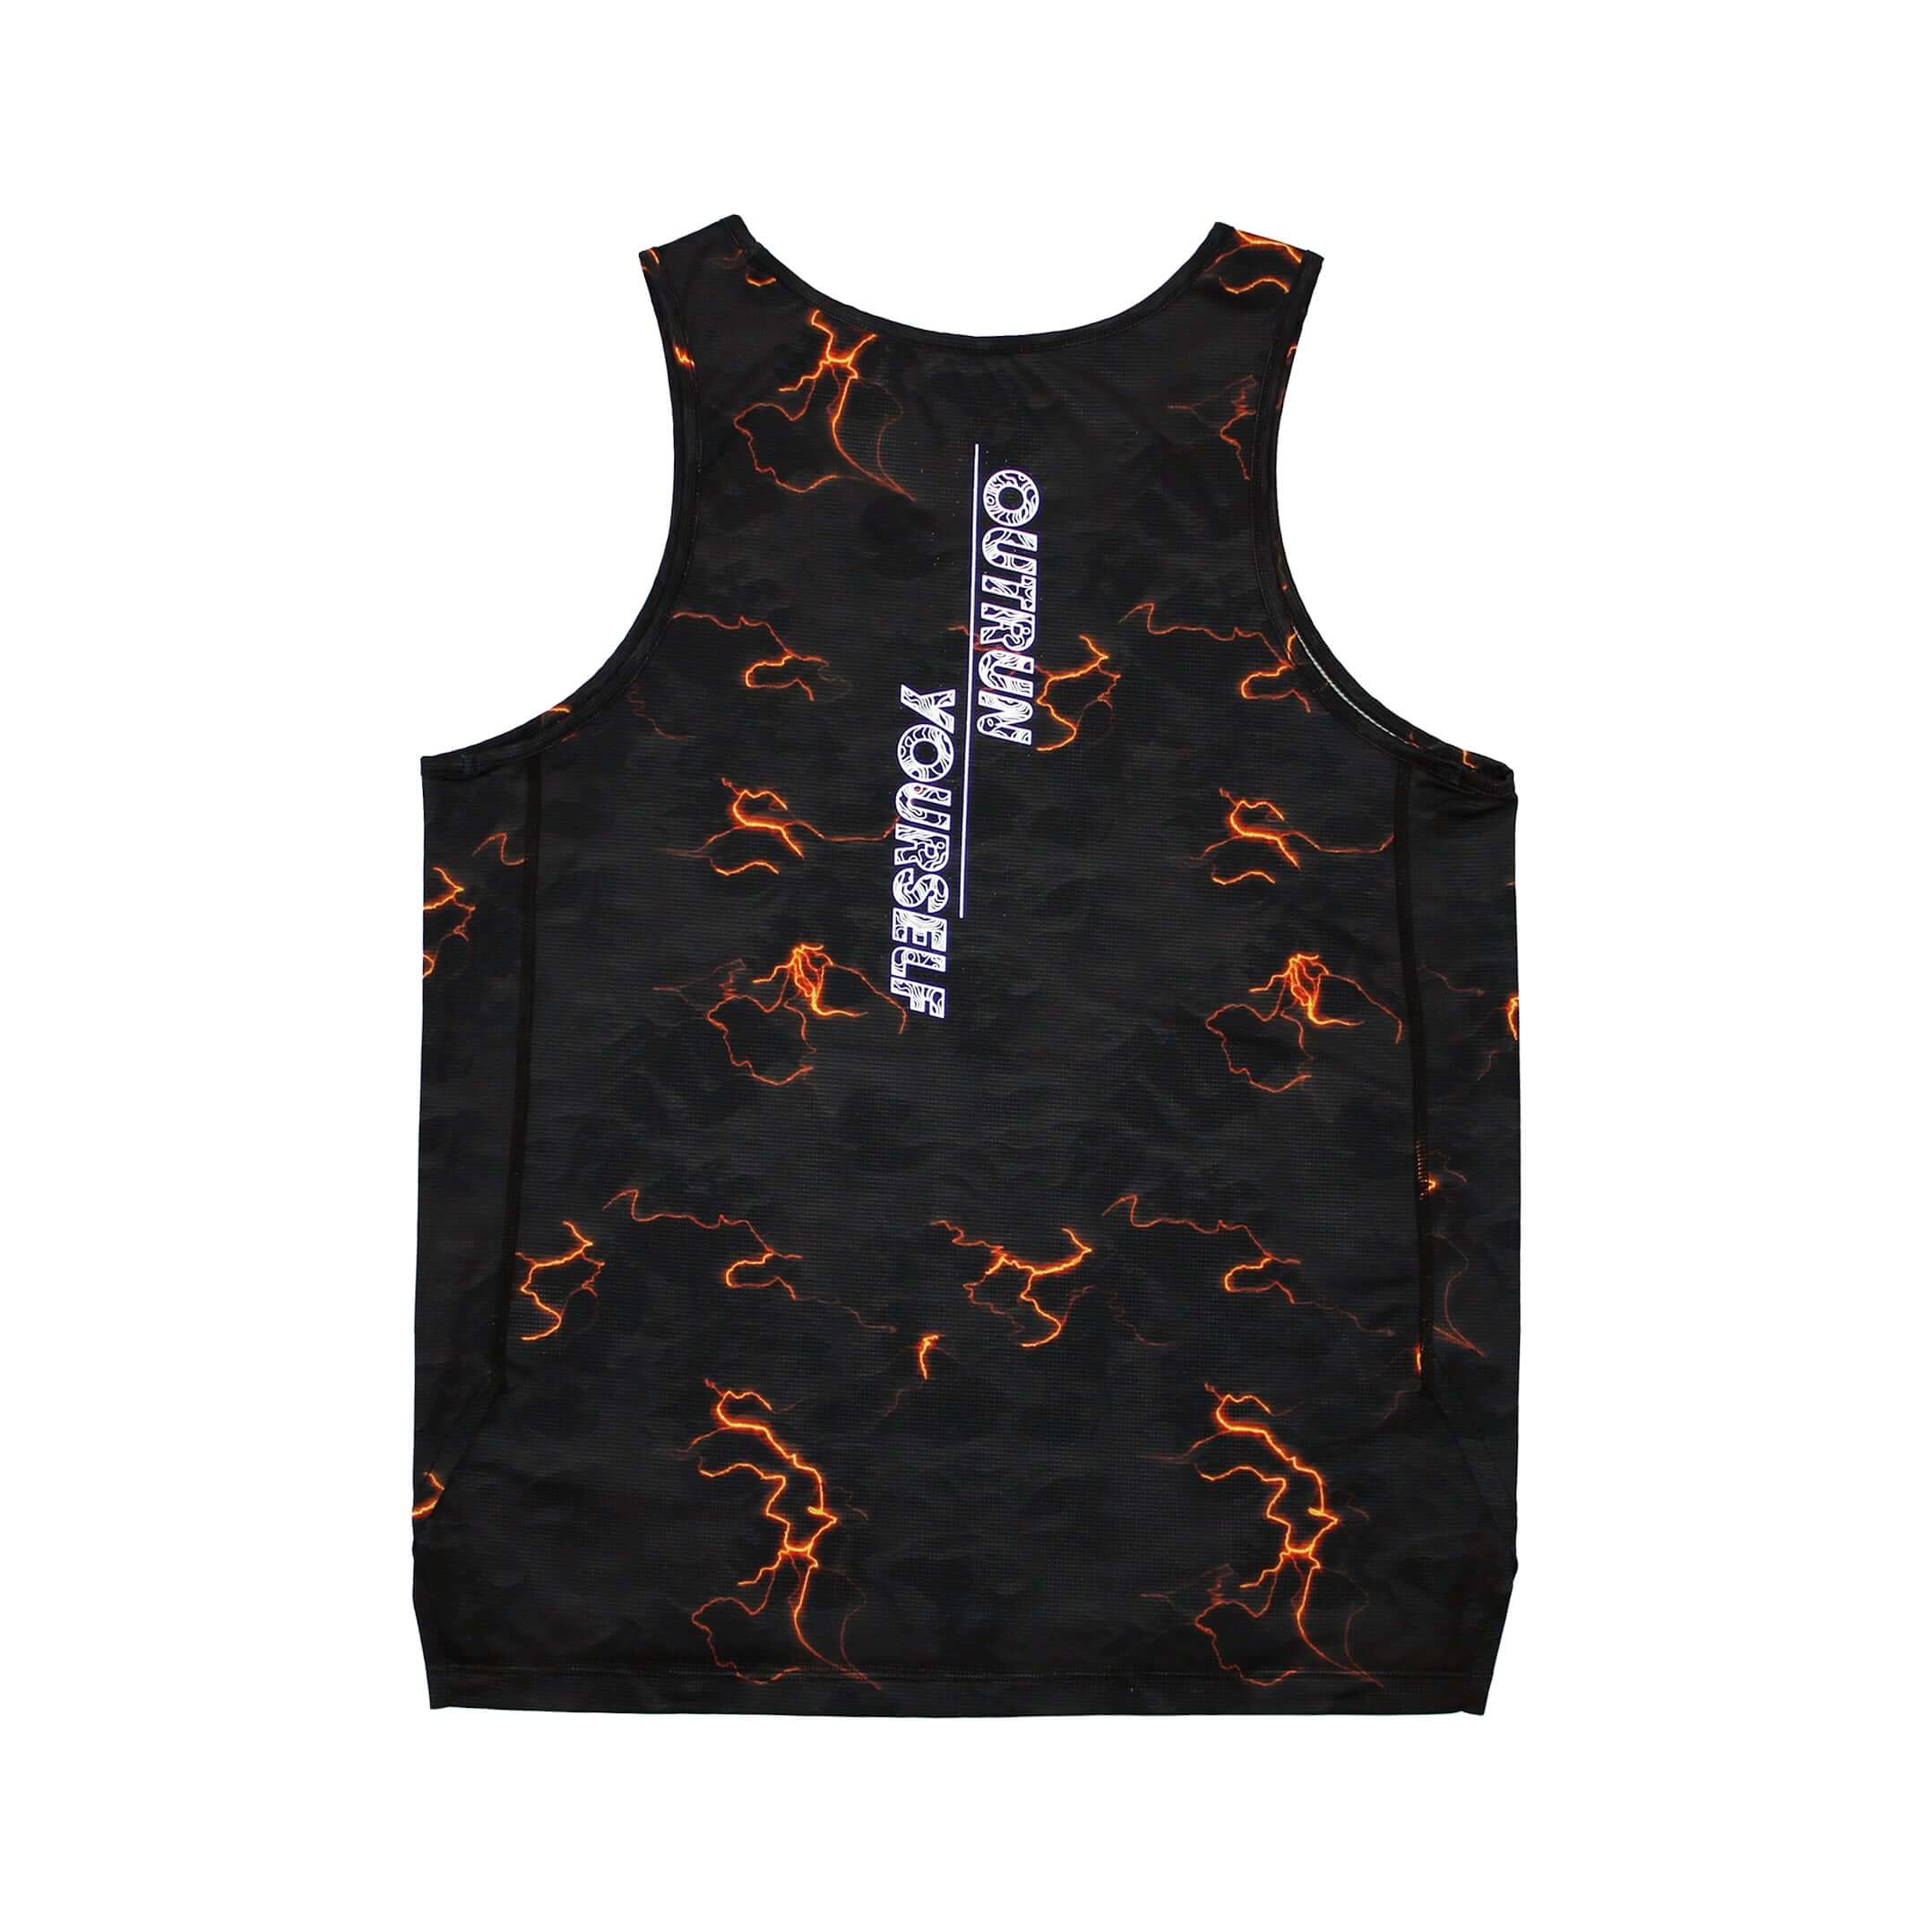 Running Singlet for high intensity workouts and race. Lightweight and breathable made from Recycling Polyester.